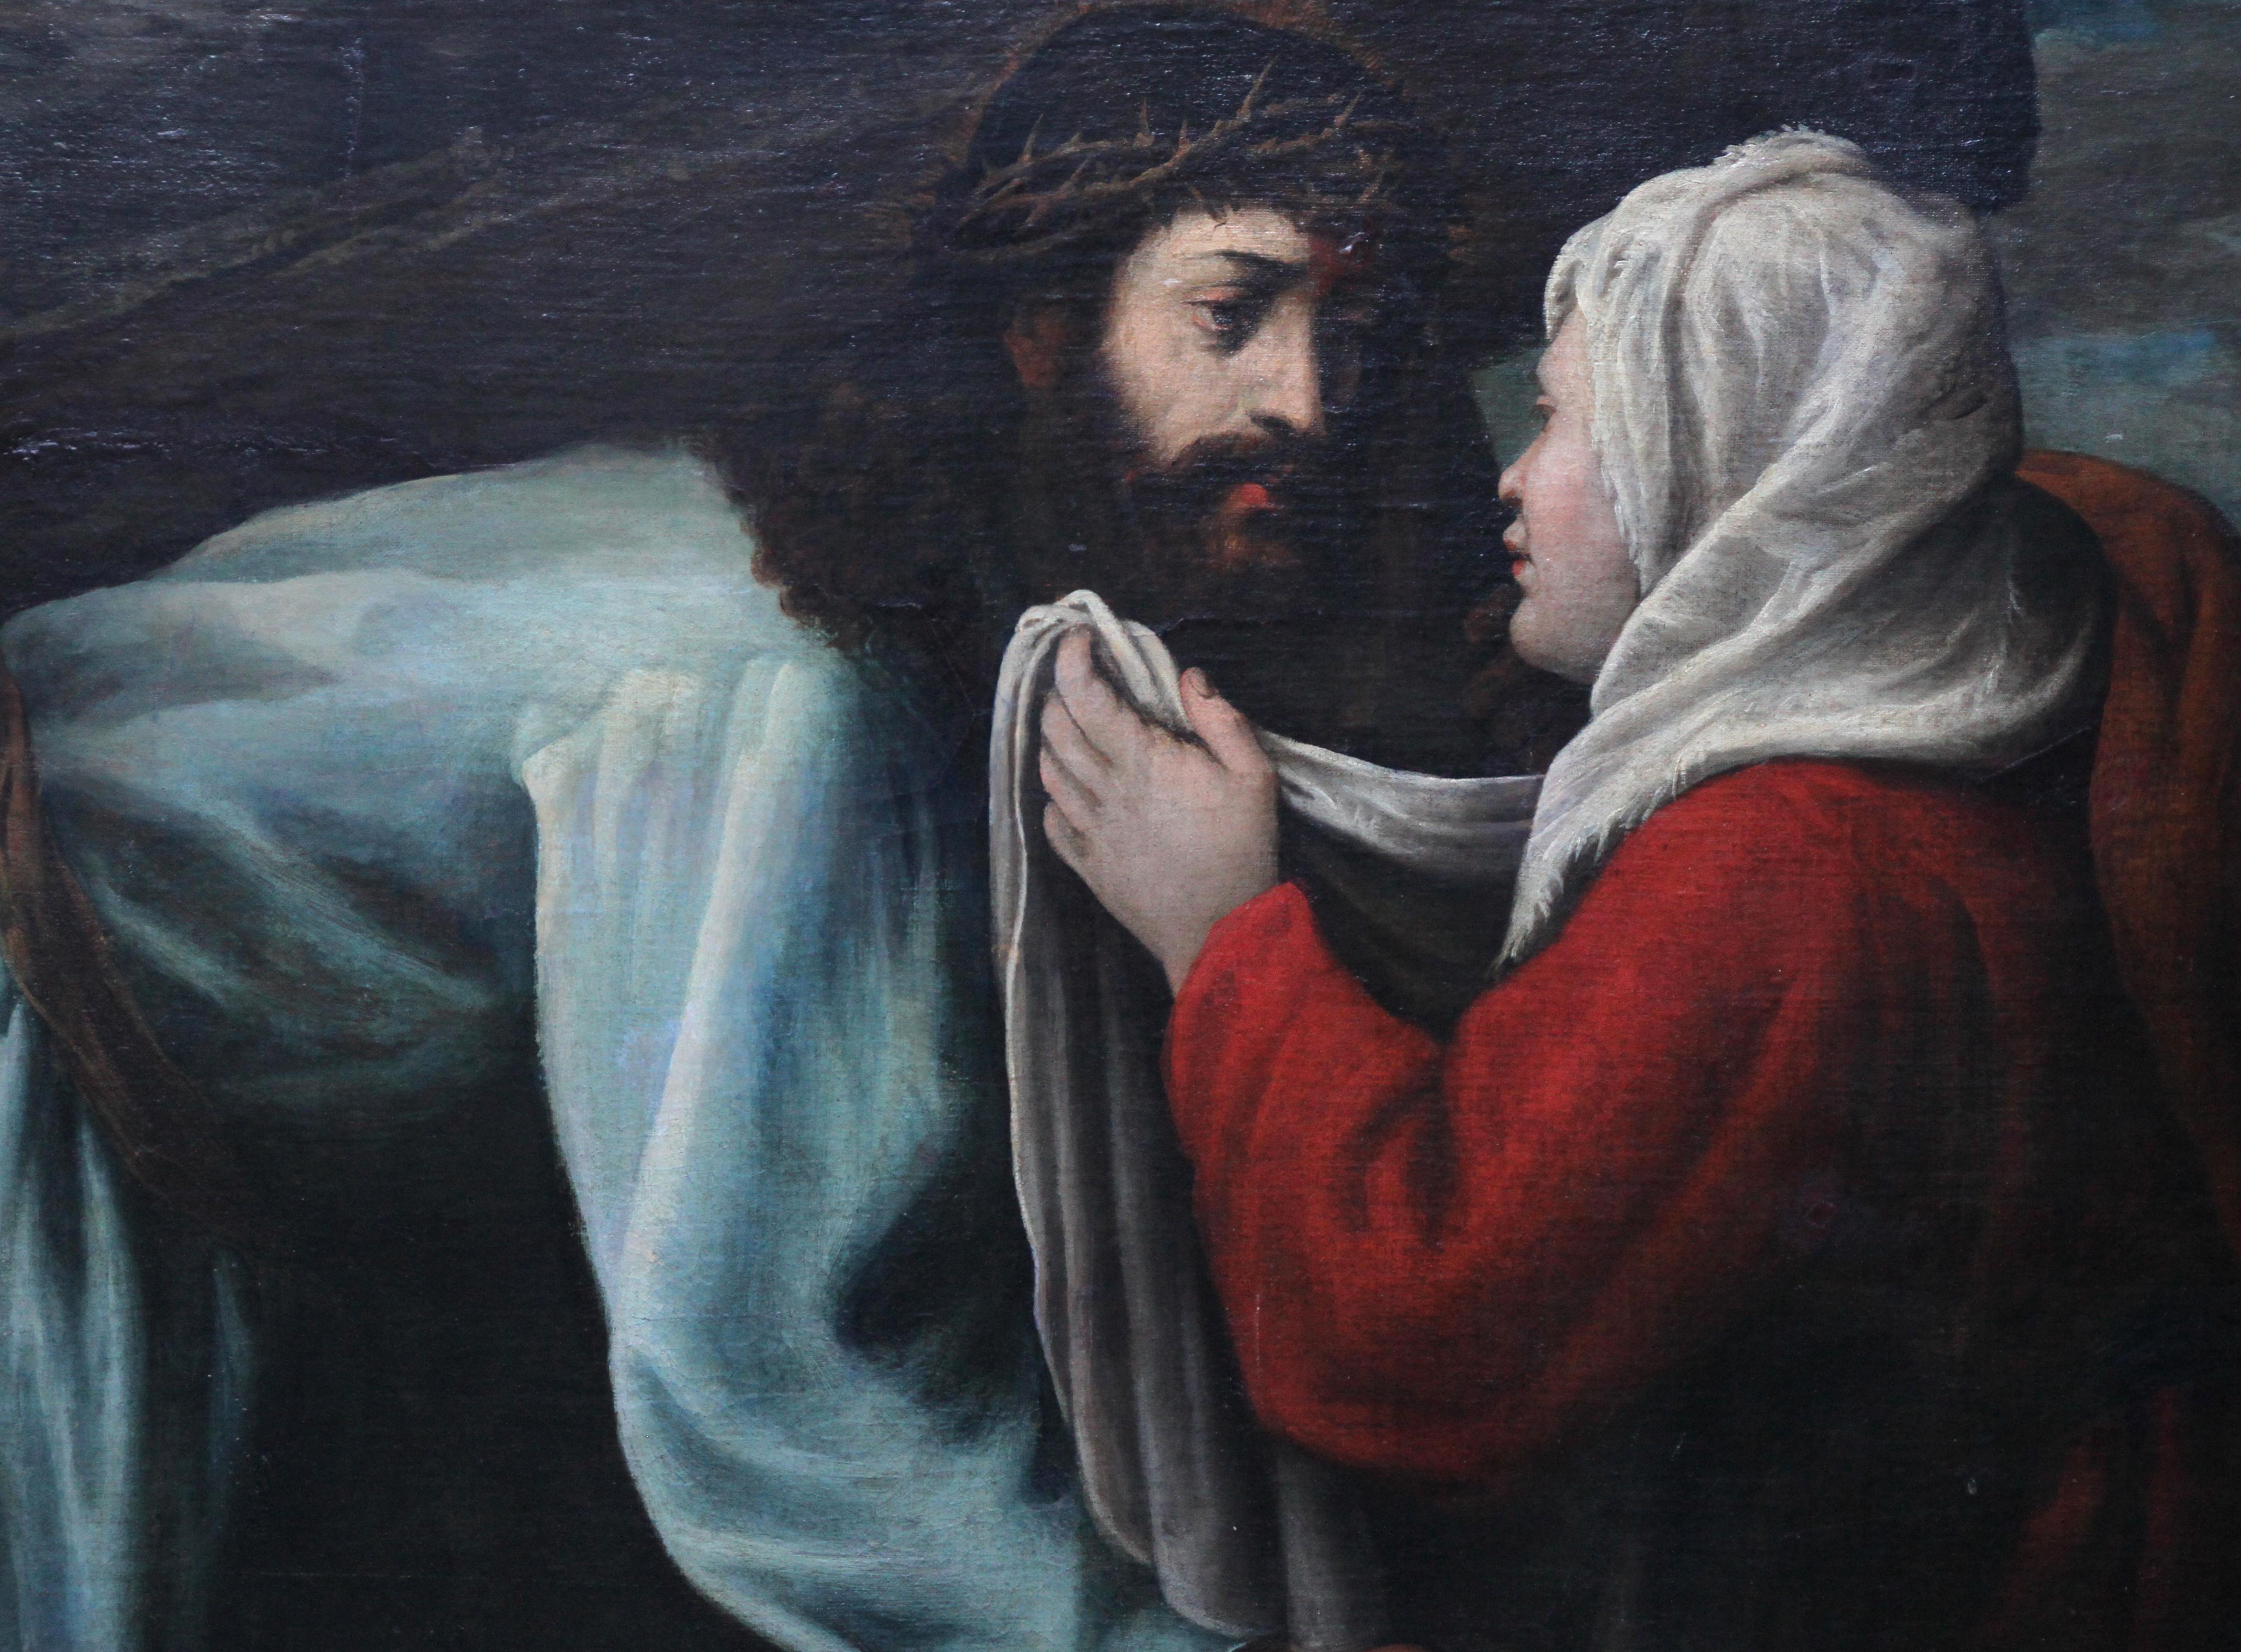 This stunning 17th century religious oil painting of Christ and Saint Veronica is attributed to an artist from the Venetian School. The painting is of Saint Veronica, wiping the face of Christ on his way to Calvary, the hill outside Jerusalem on